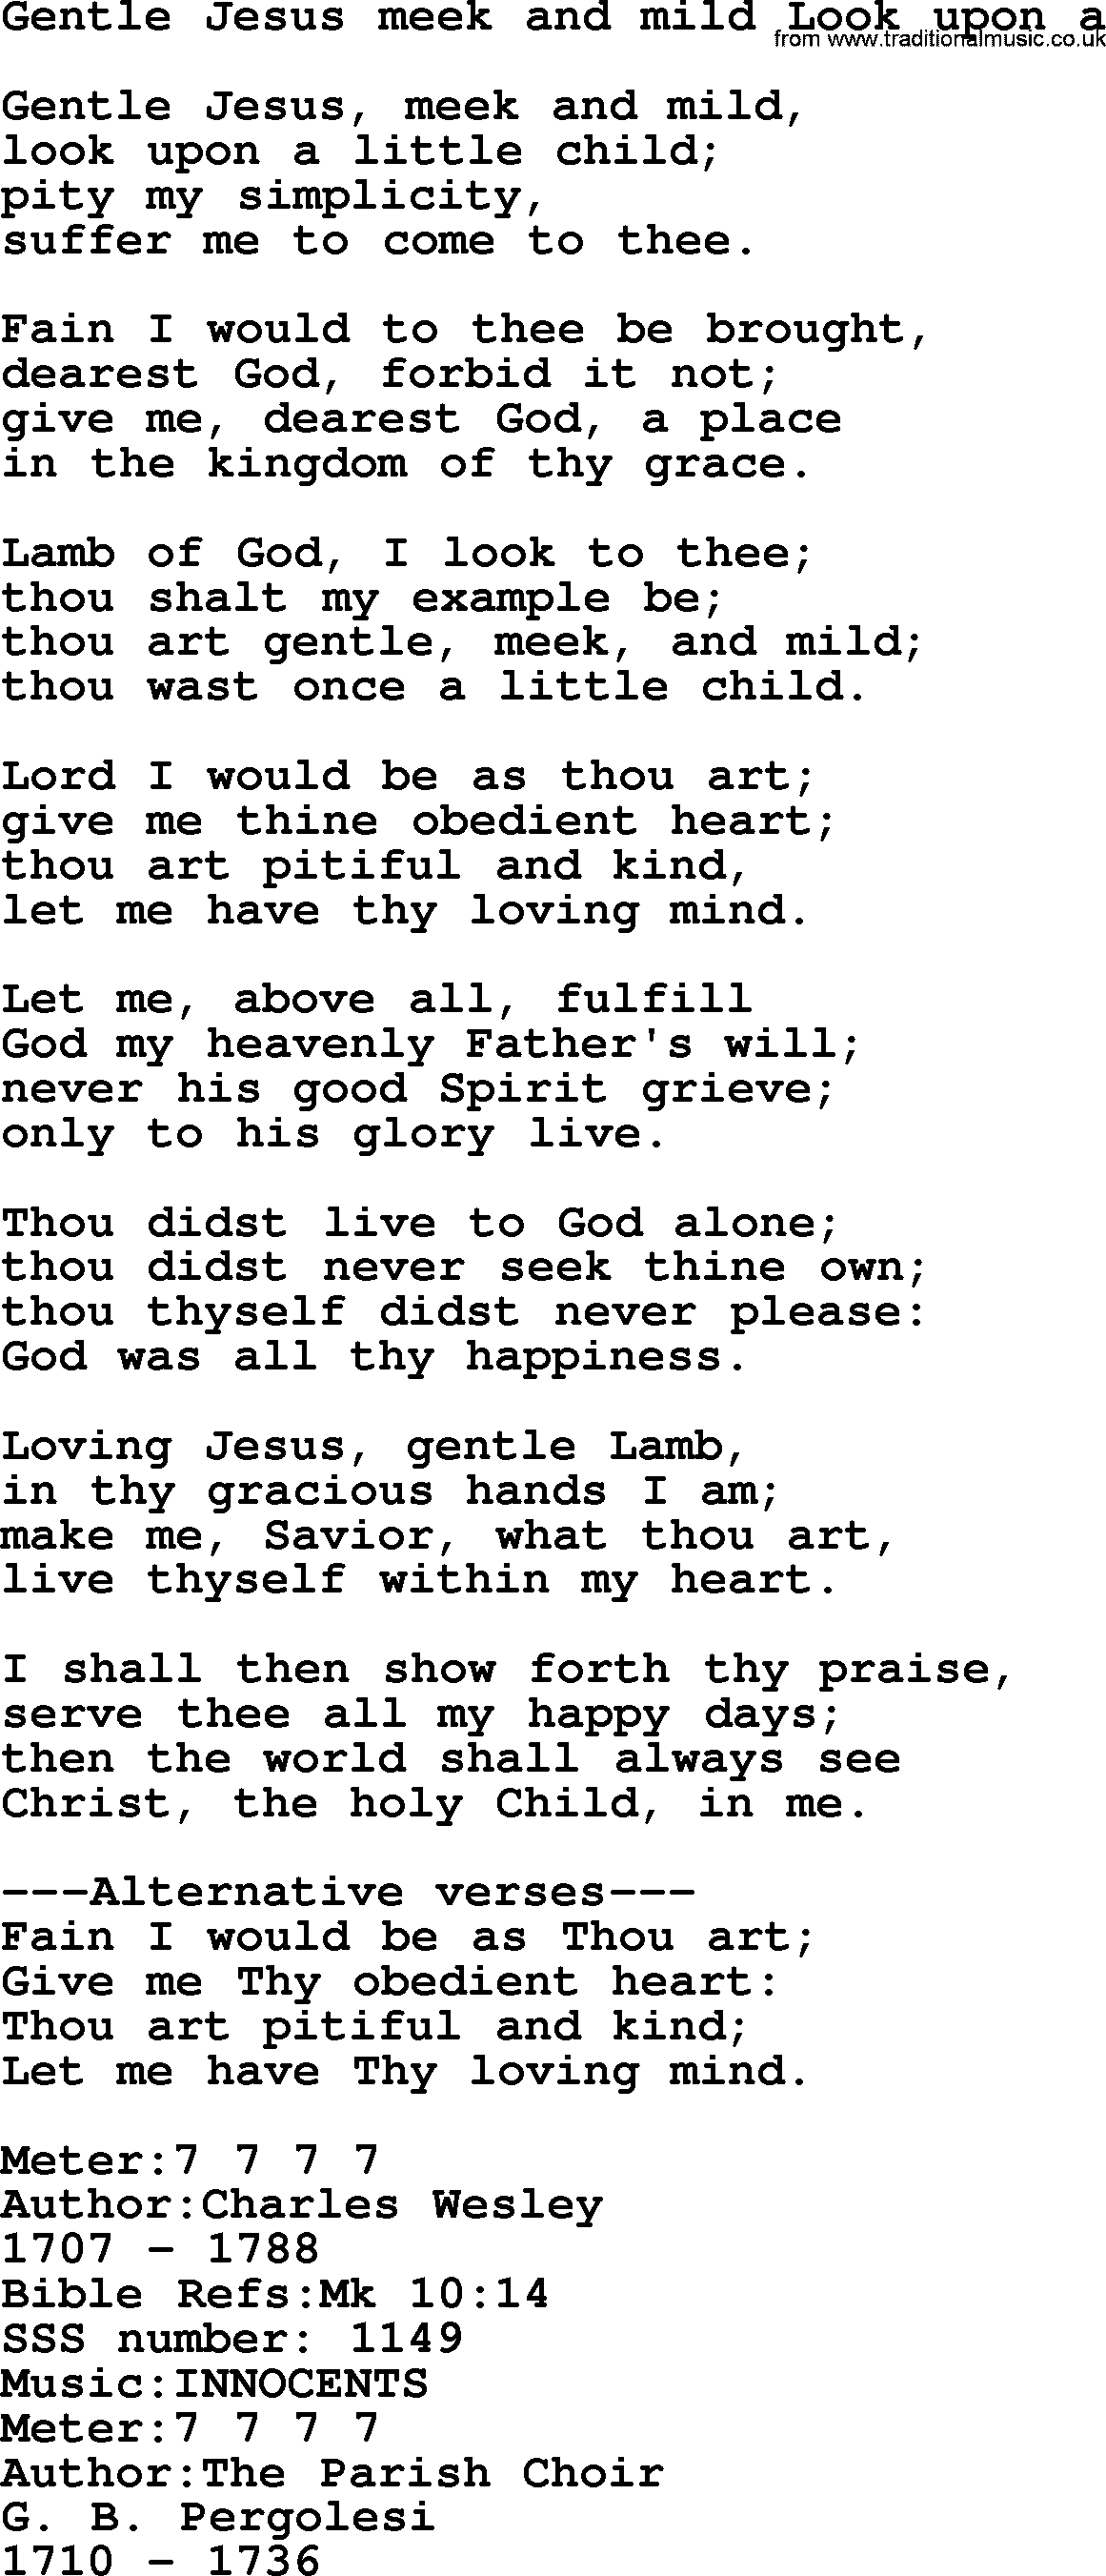 Sacred Songs and Solos complete, 1200 Hymns, title: Gentle Jesus Meek And Mild Look Upon A, lyrics and PDF